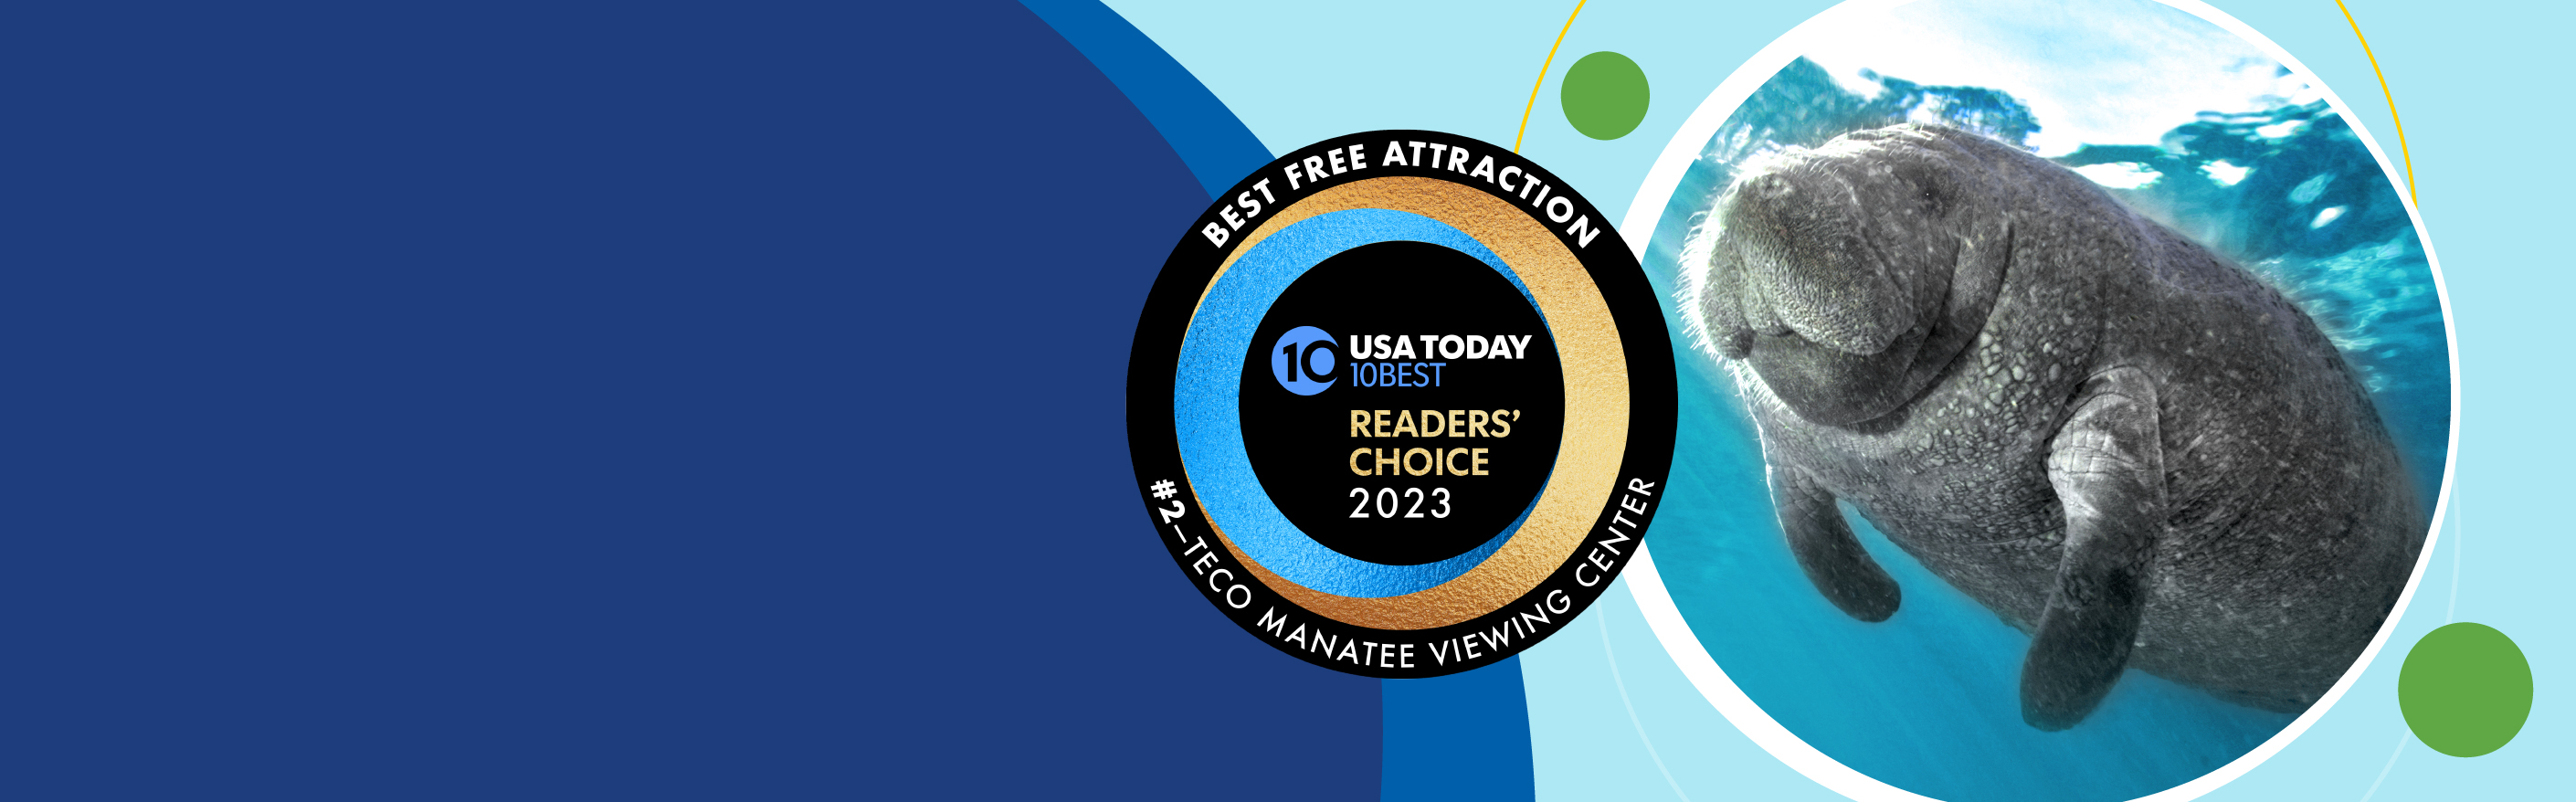 Manatee Viewing Center - USA Today 10Best Readers' Choice 2023 graphic placed within colorful circle.